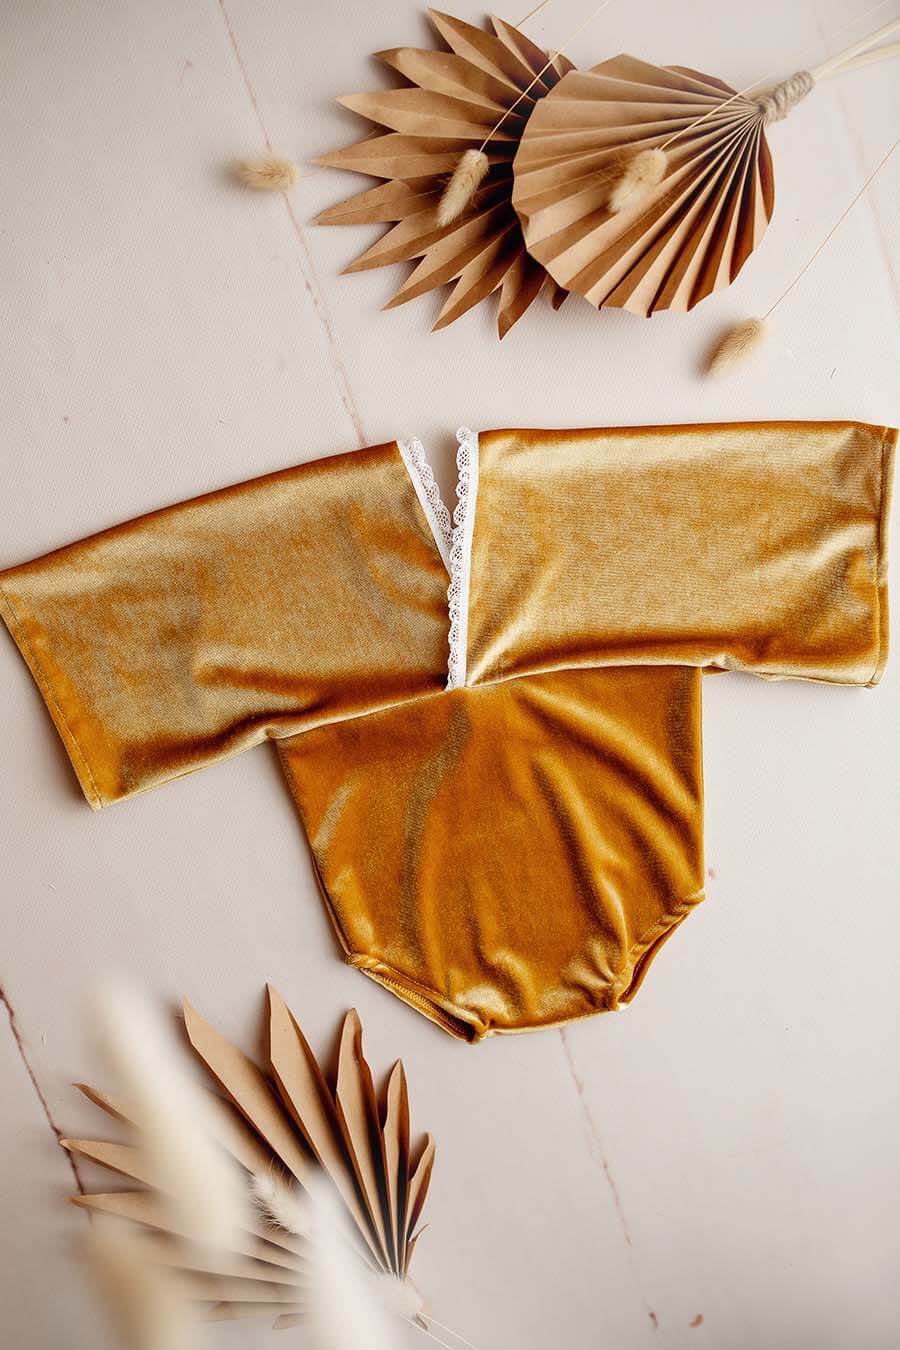 This is a product photo from a baby romper. The romper has a velours fabric and is in the color amber. 